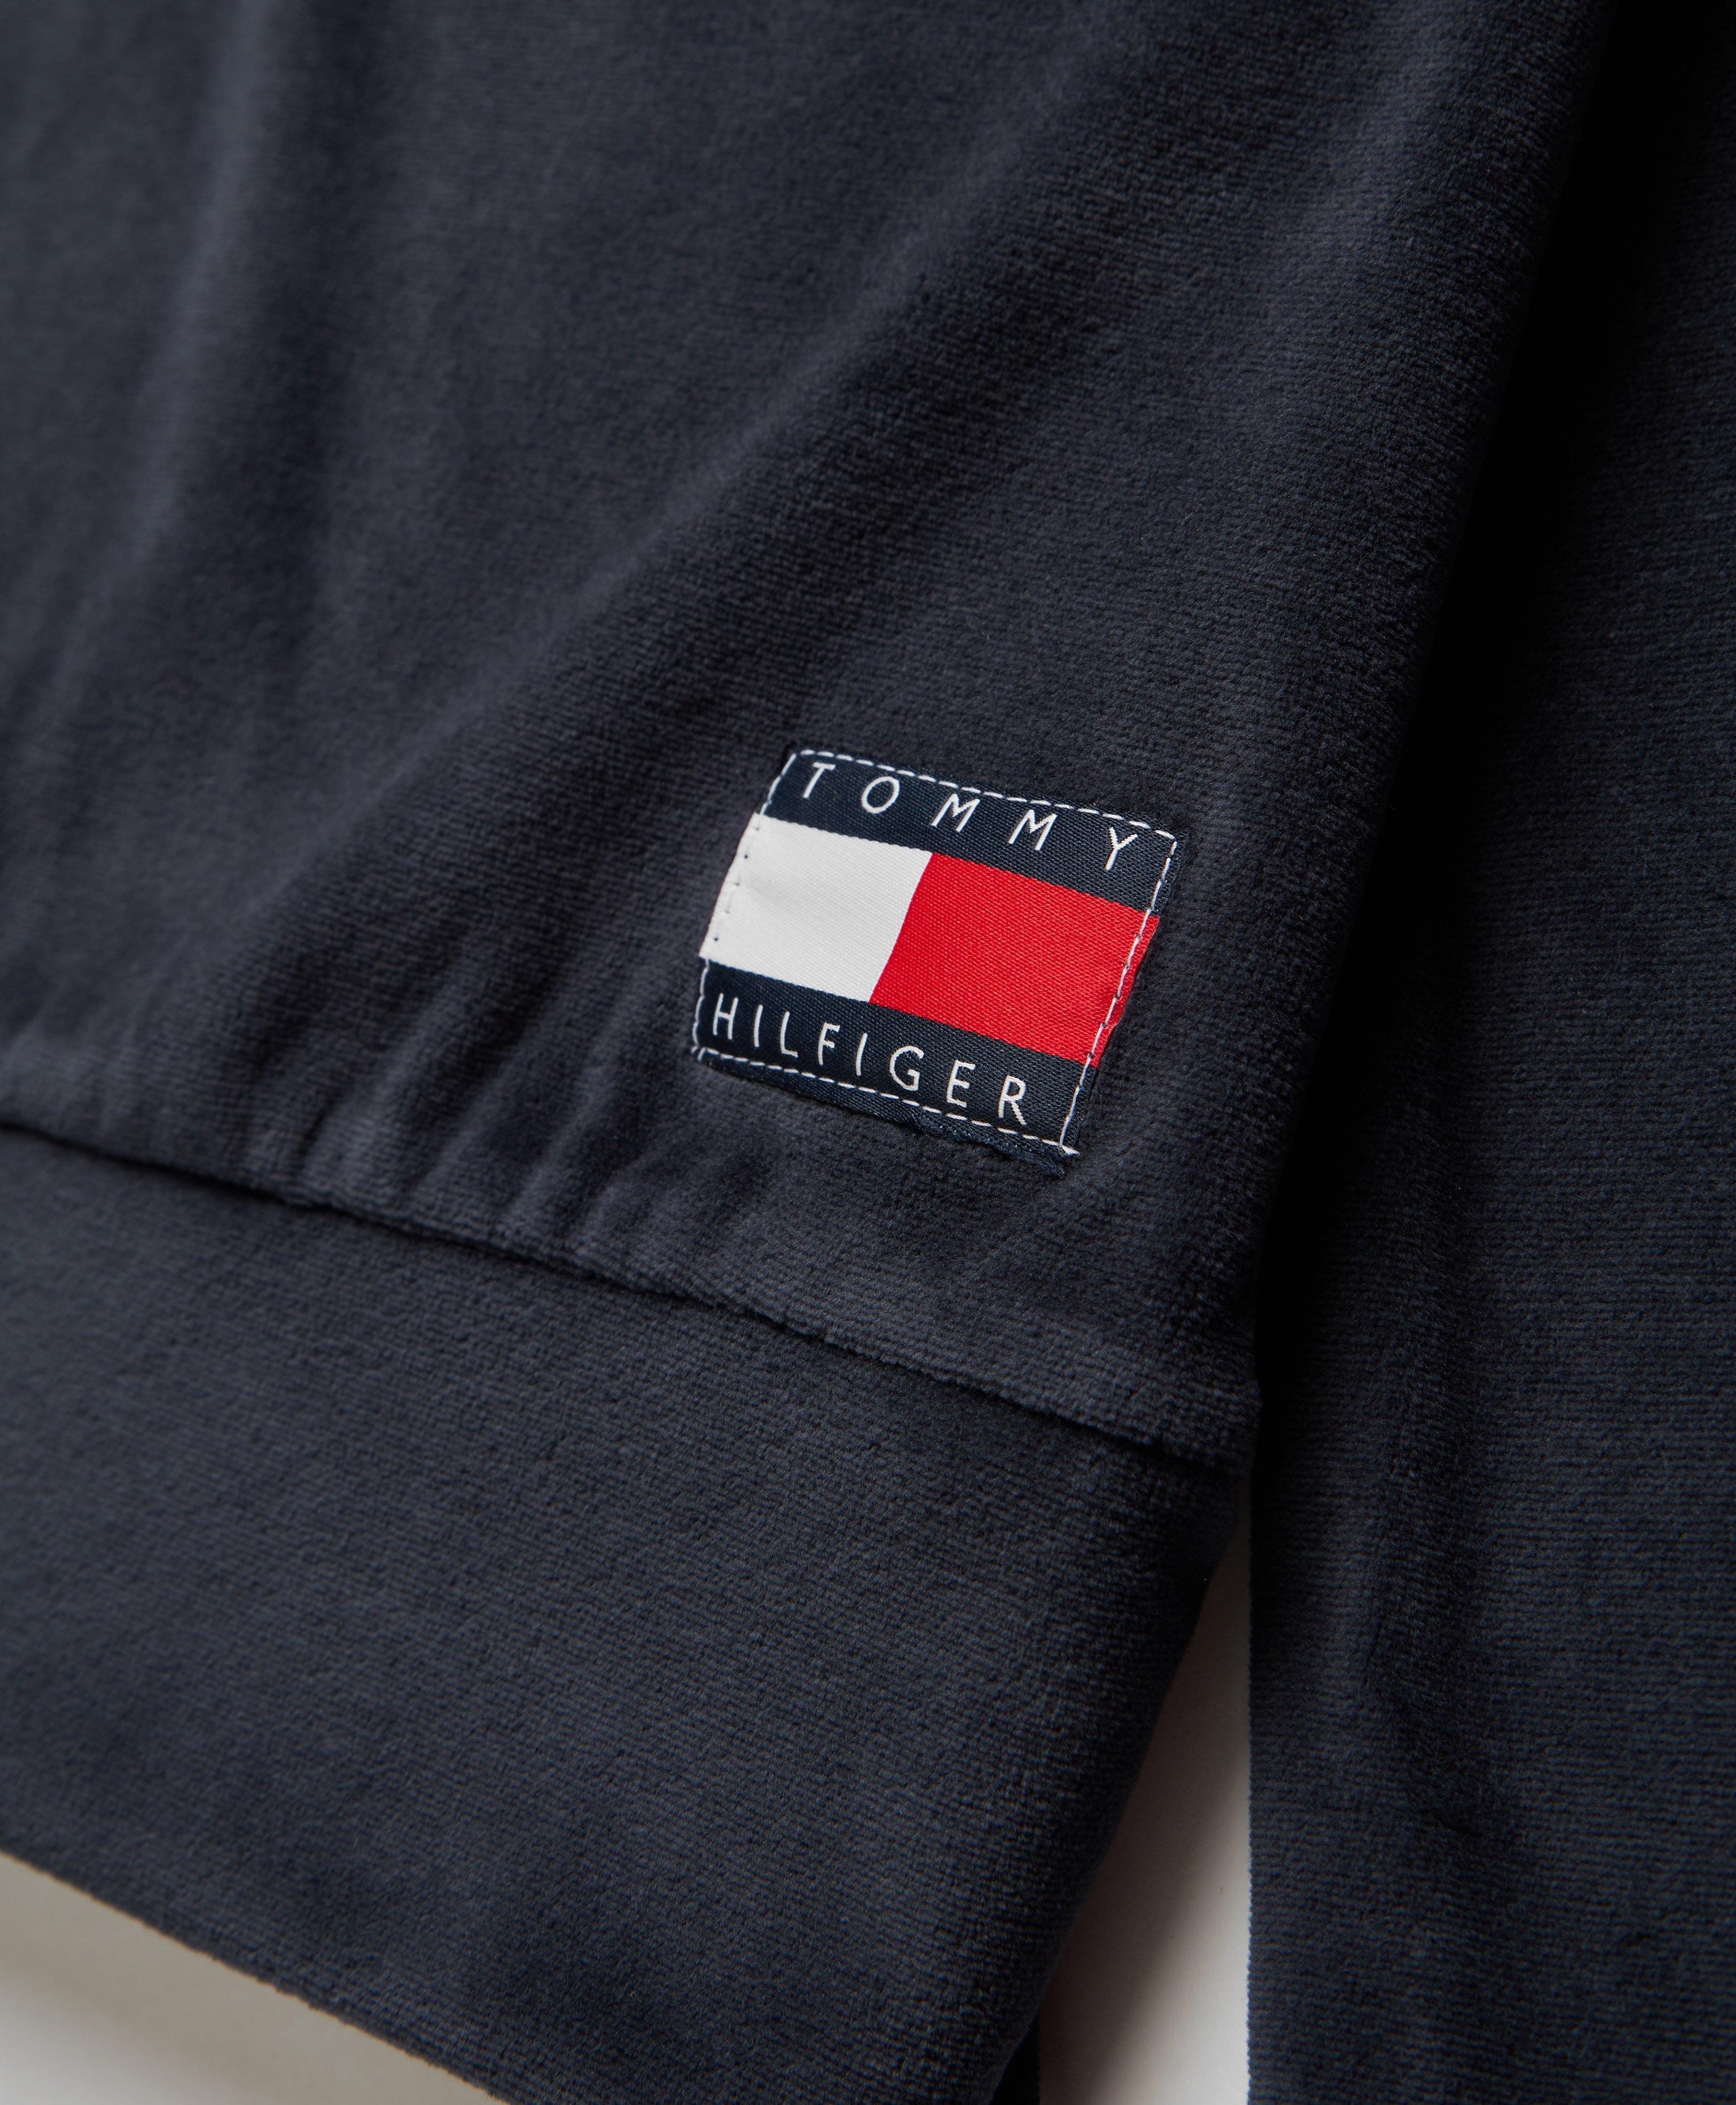 softest velvet fabric Tommy Hilfiger dark gray chenille collared sweatshirt with small embroidered logo